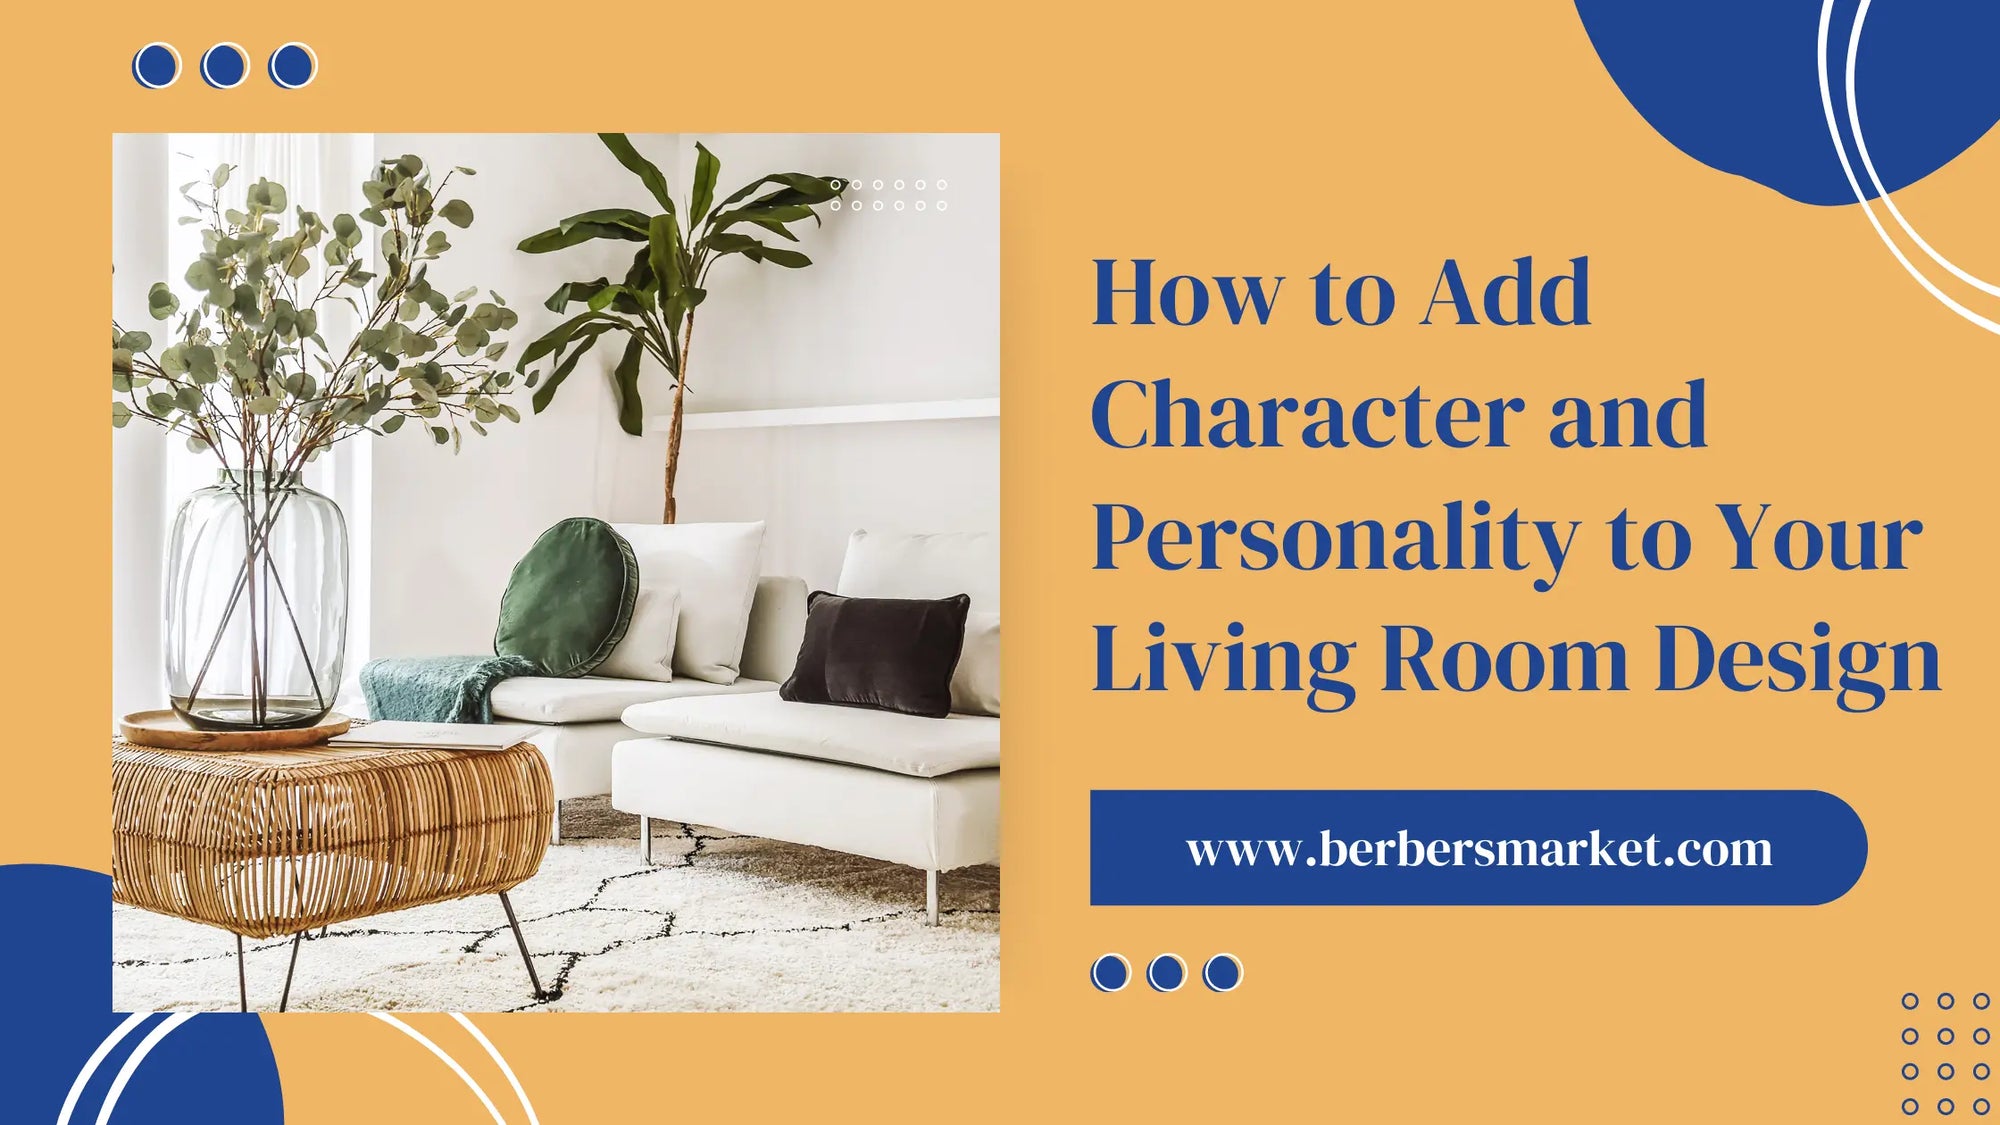 Blog banner talking about: "How to Add Character and Personality to Your Living Room Design" with a picture showing a bright modern living room with a handmade Moroccan rug